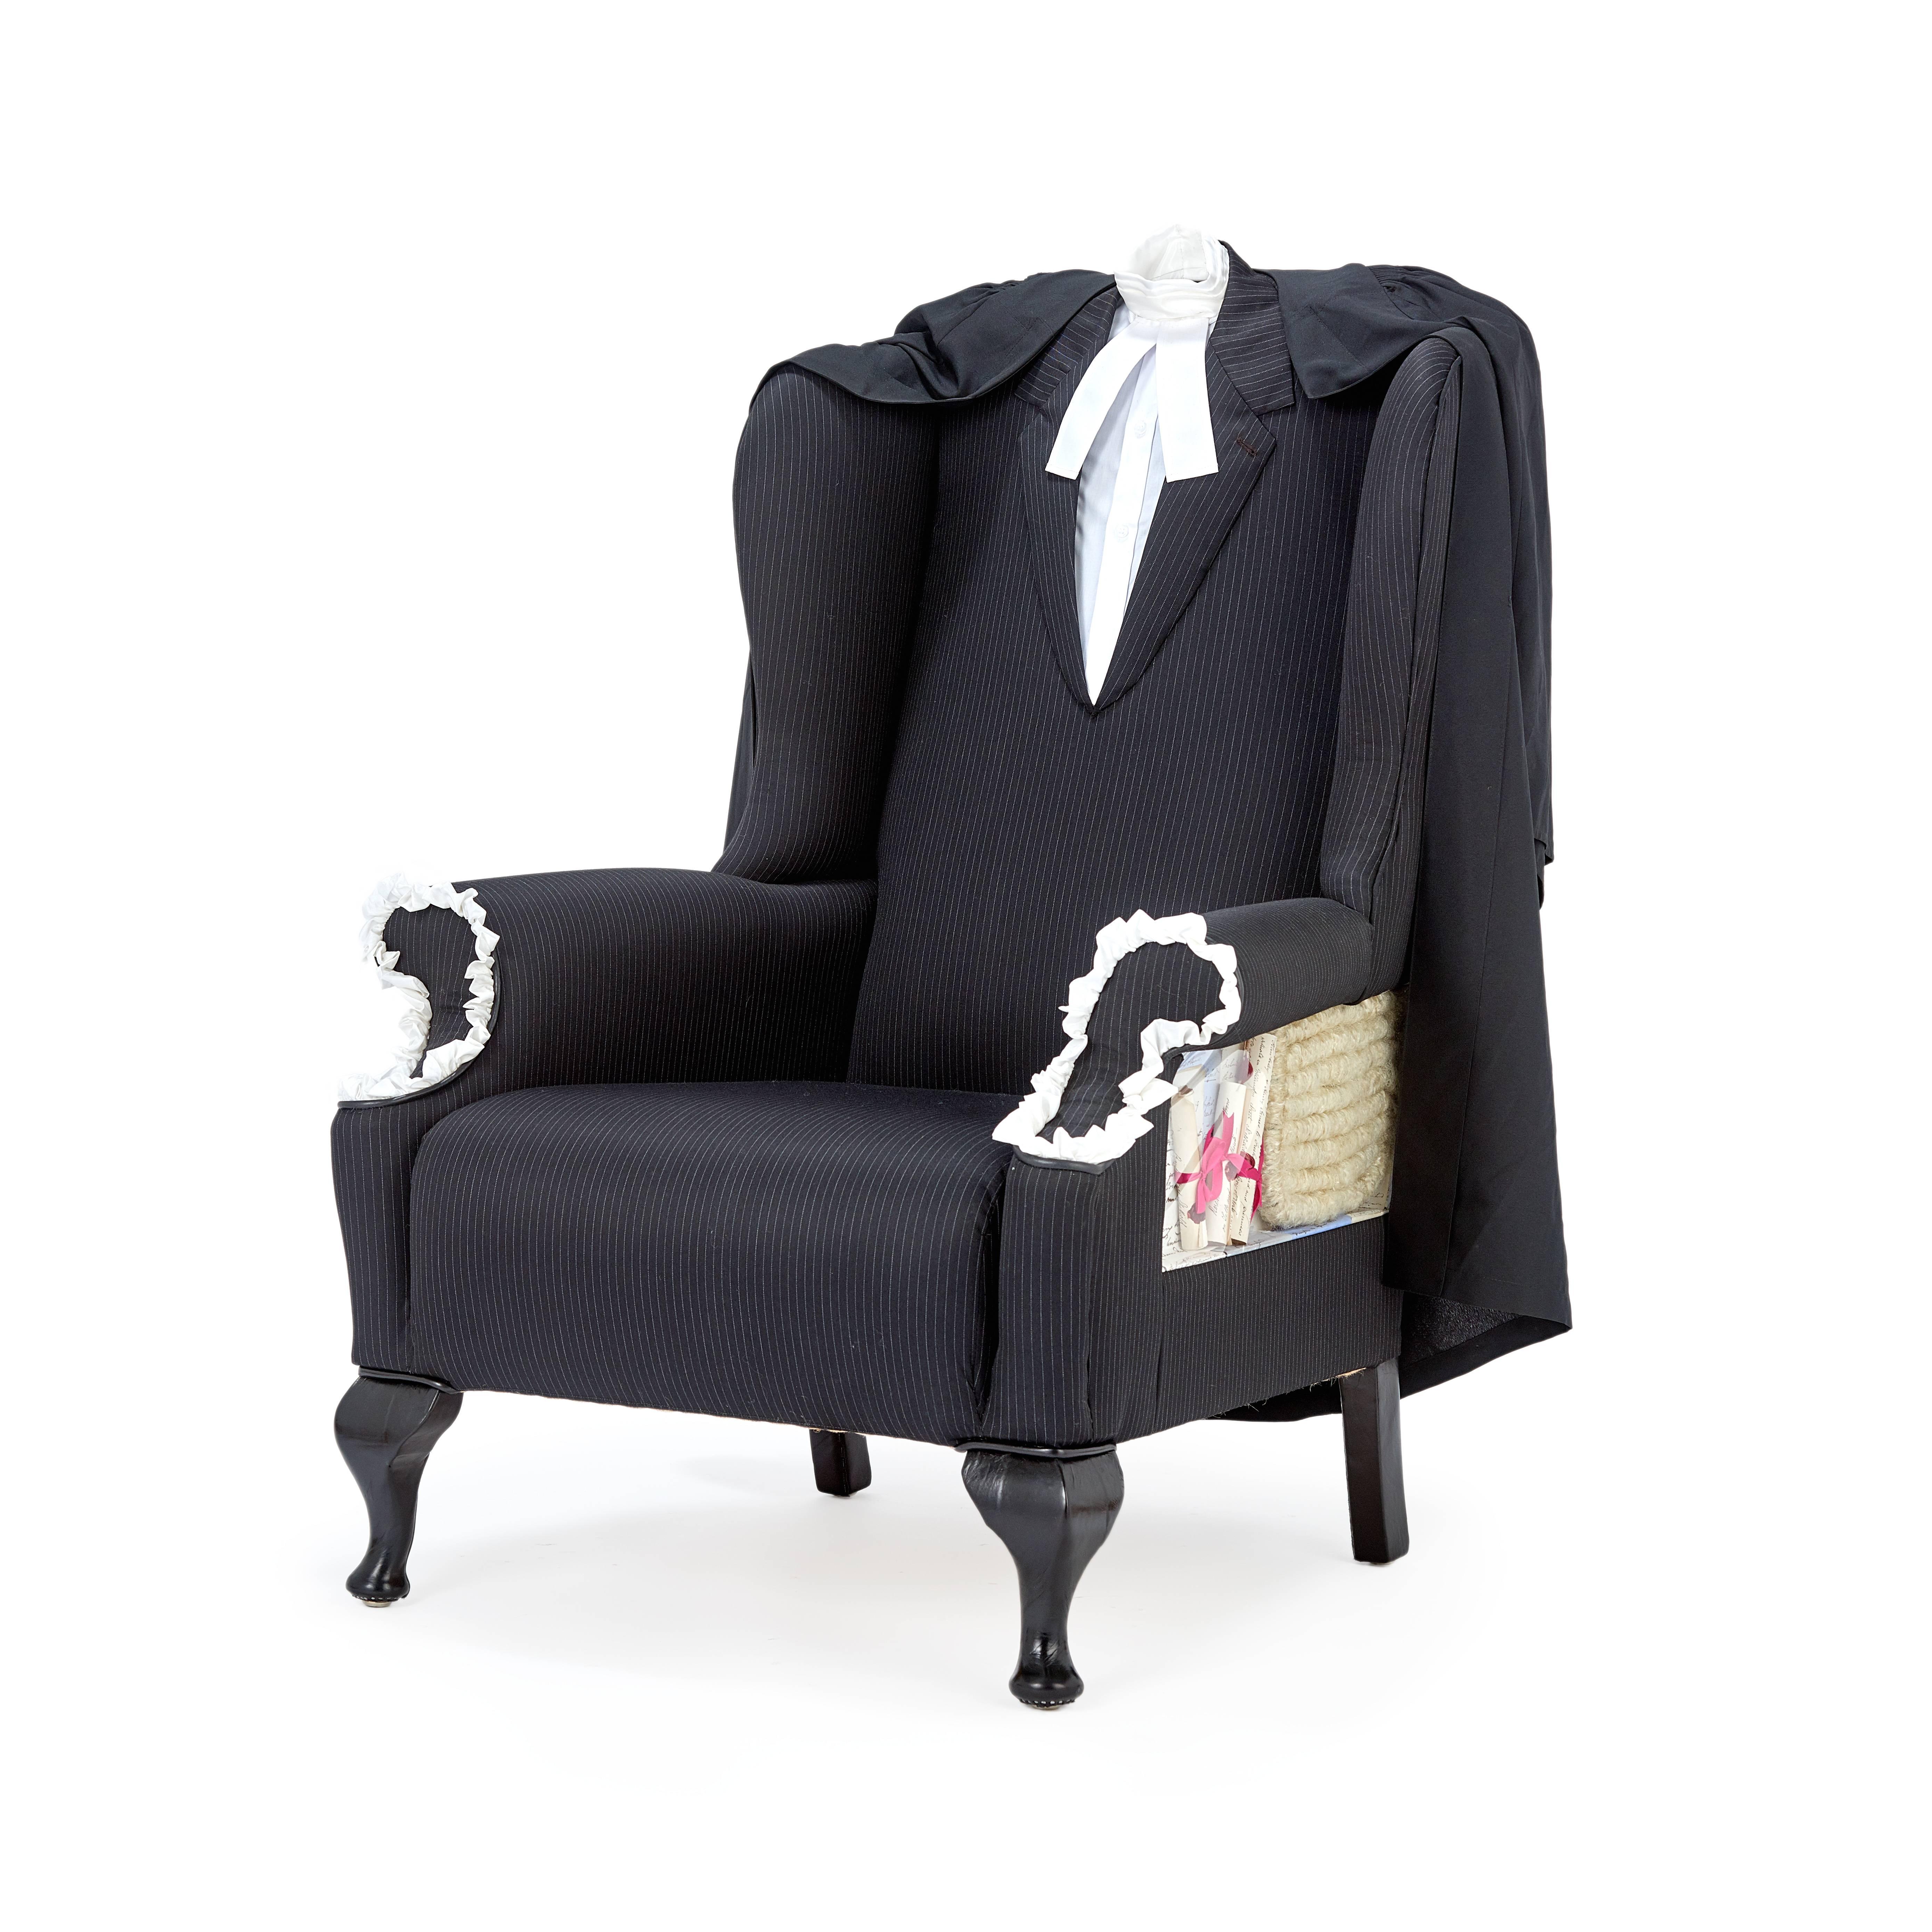 Delightful Victorian fireside wing chair with a twist, traditionally restored frame then lovingly reupholstered in a quirky mix of eclectic charcoal pinstriped suiting fabric, piped in black patent leather with matching handmade black patent leather